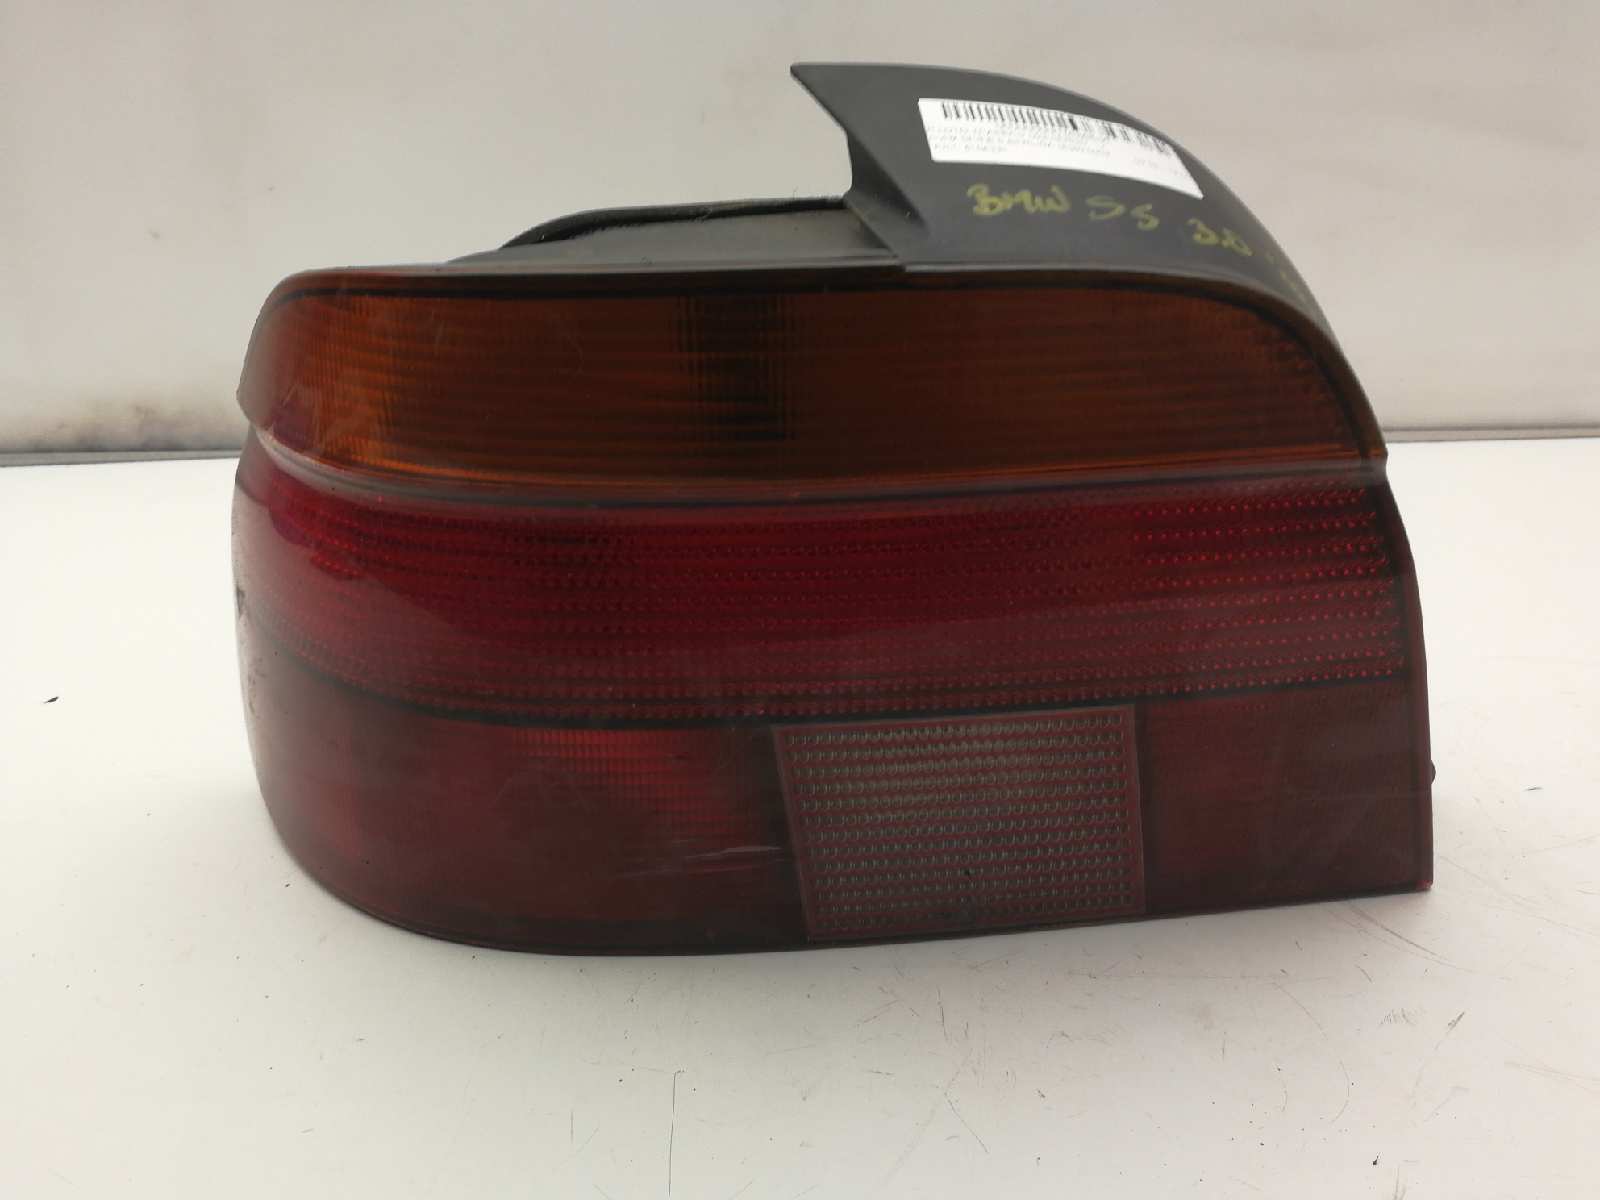 BMW 5 Series E39 (1995-2004) Rear Left Taillight 8358031, 14603300 18499261